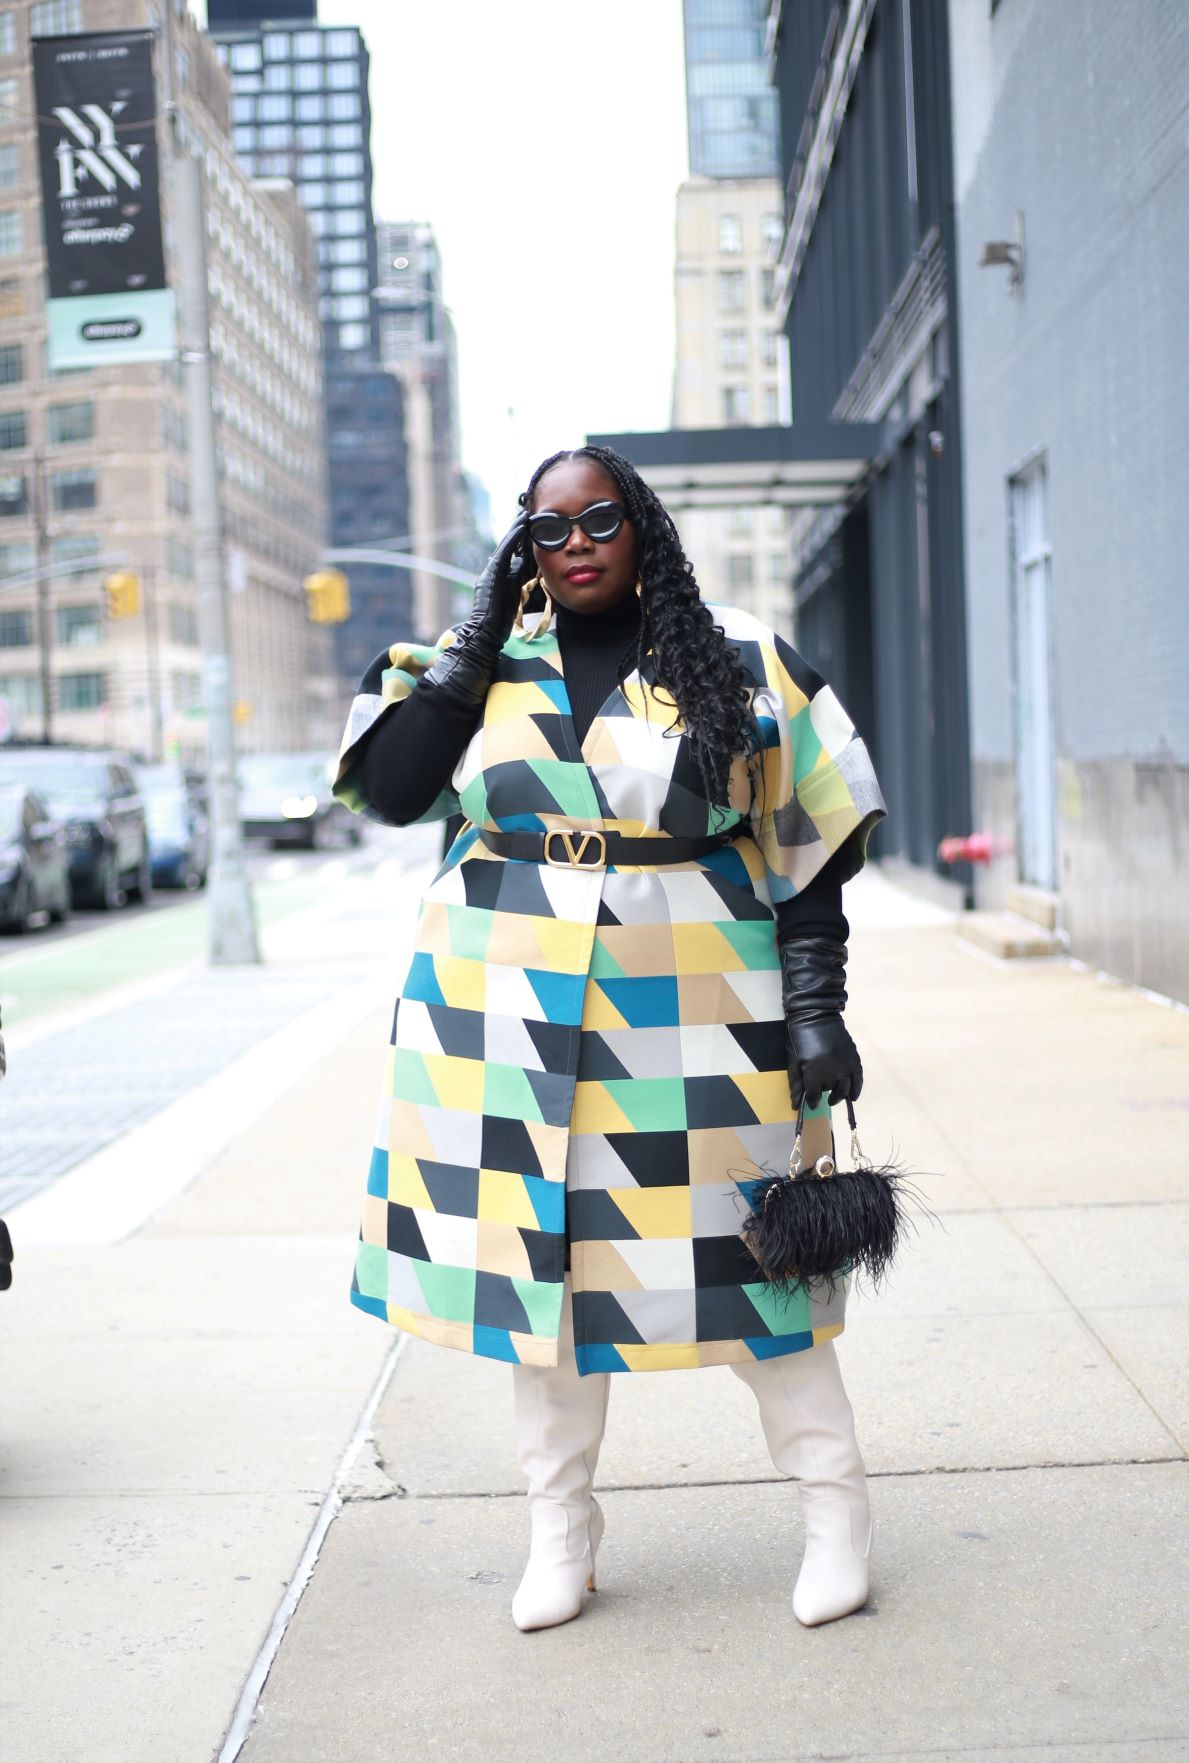 New York Fashion Week Outfits featuring plus size blogger Stylish curves in a colorful checkered coat with white boots and black leather gloves, black sunglasses, and a feather bag